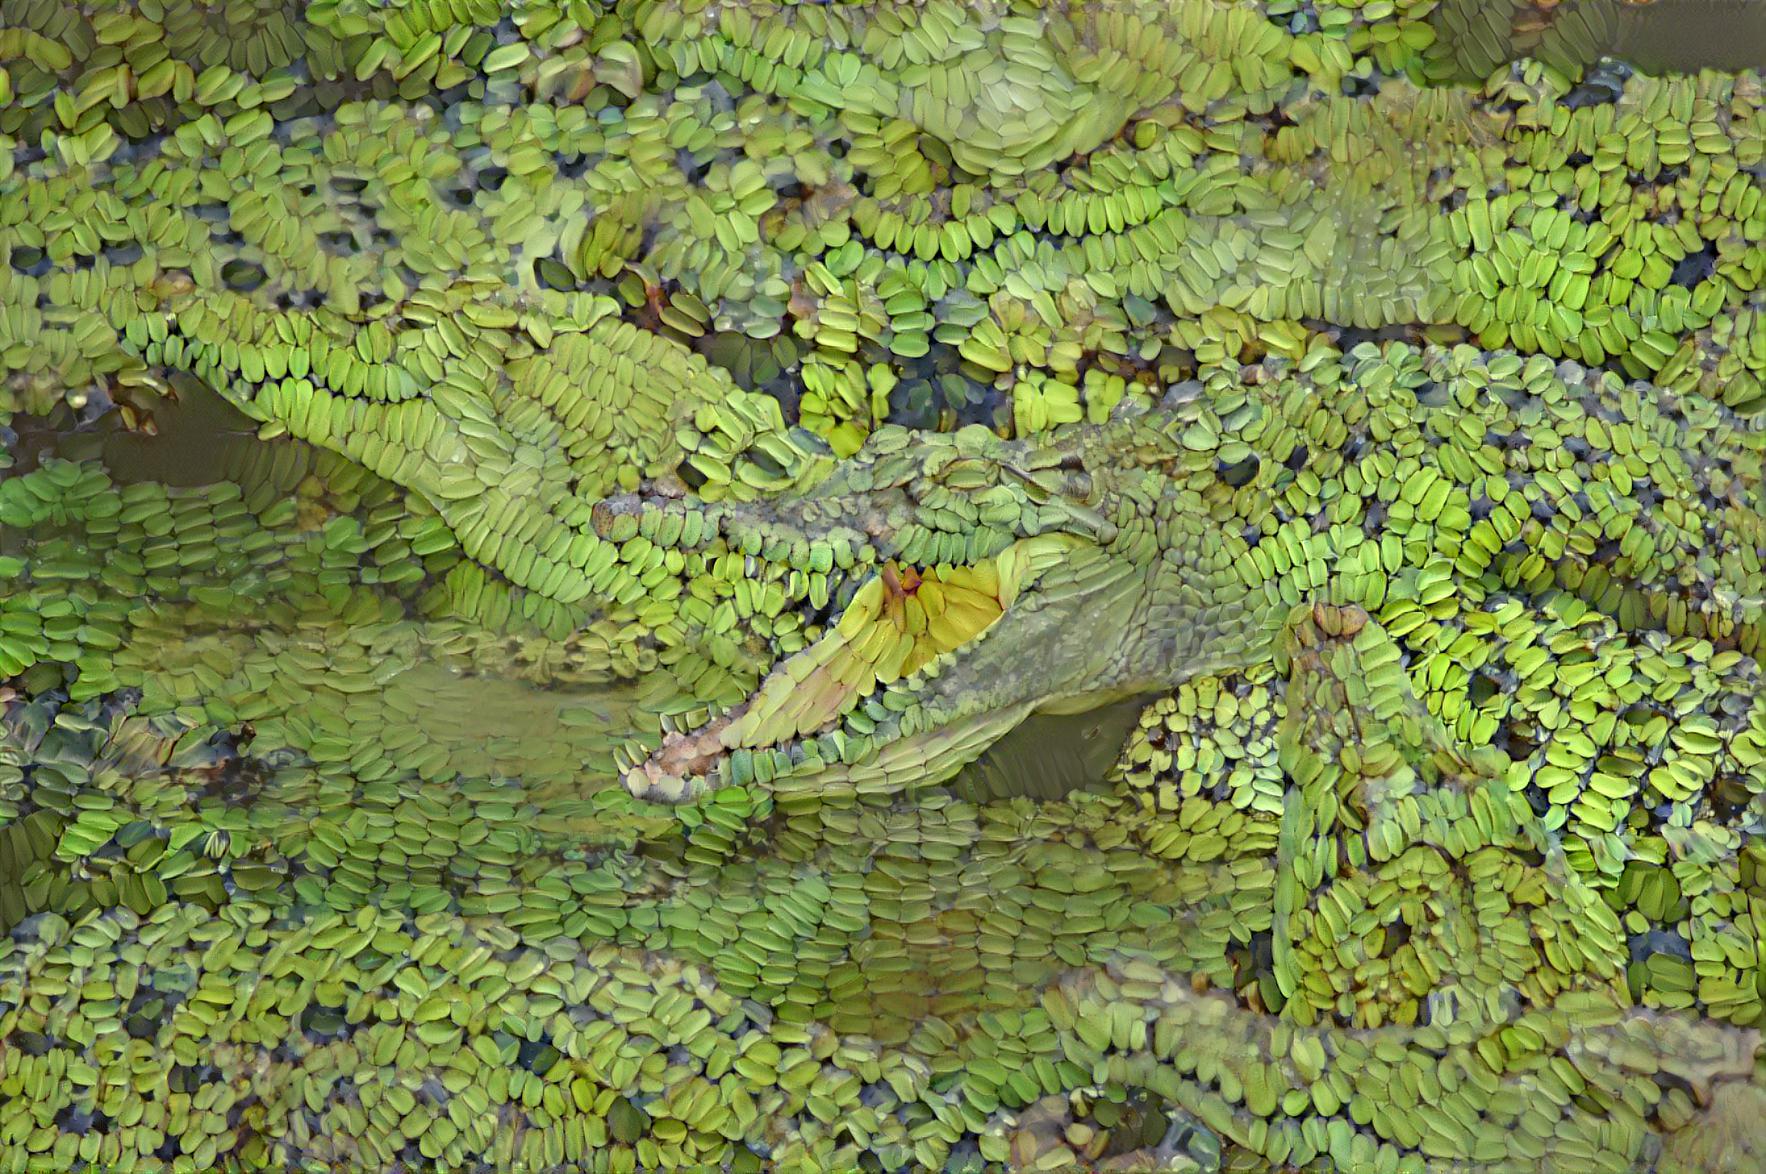 crocodile in the lillypads